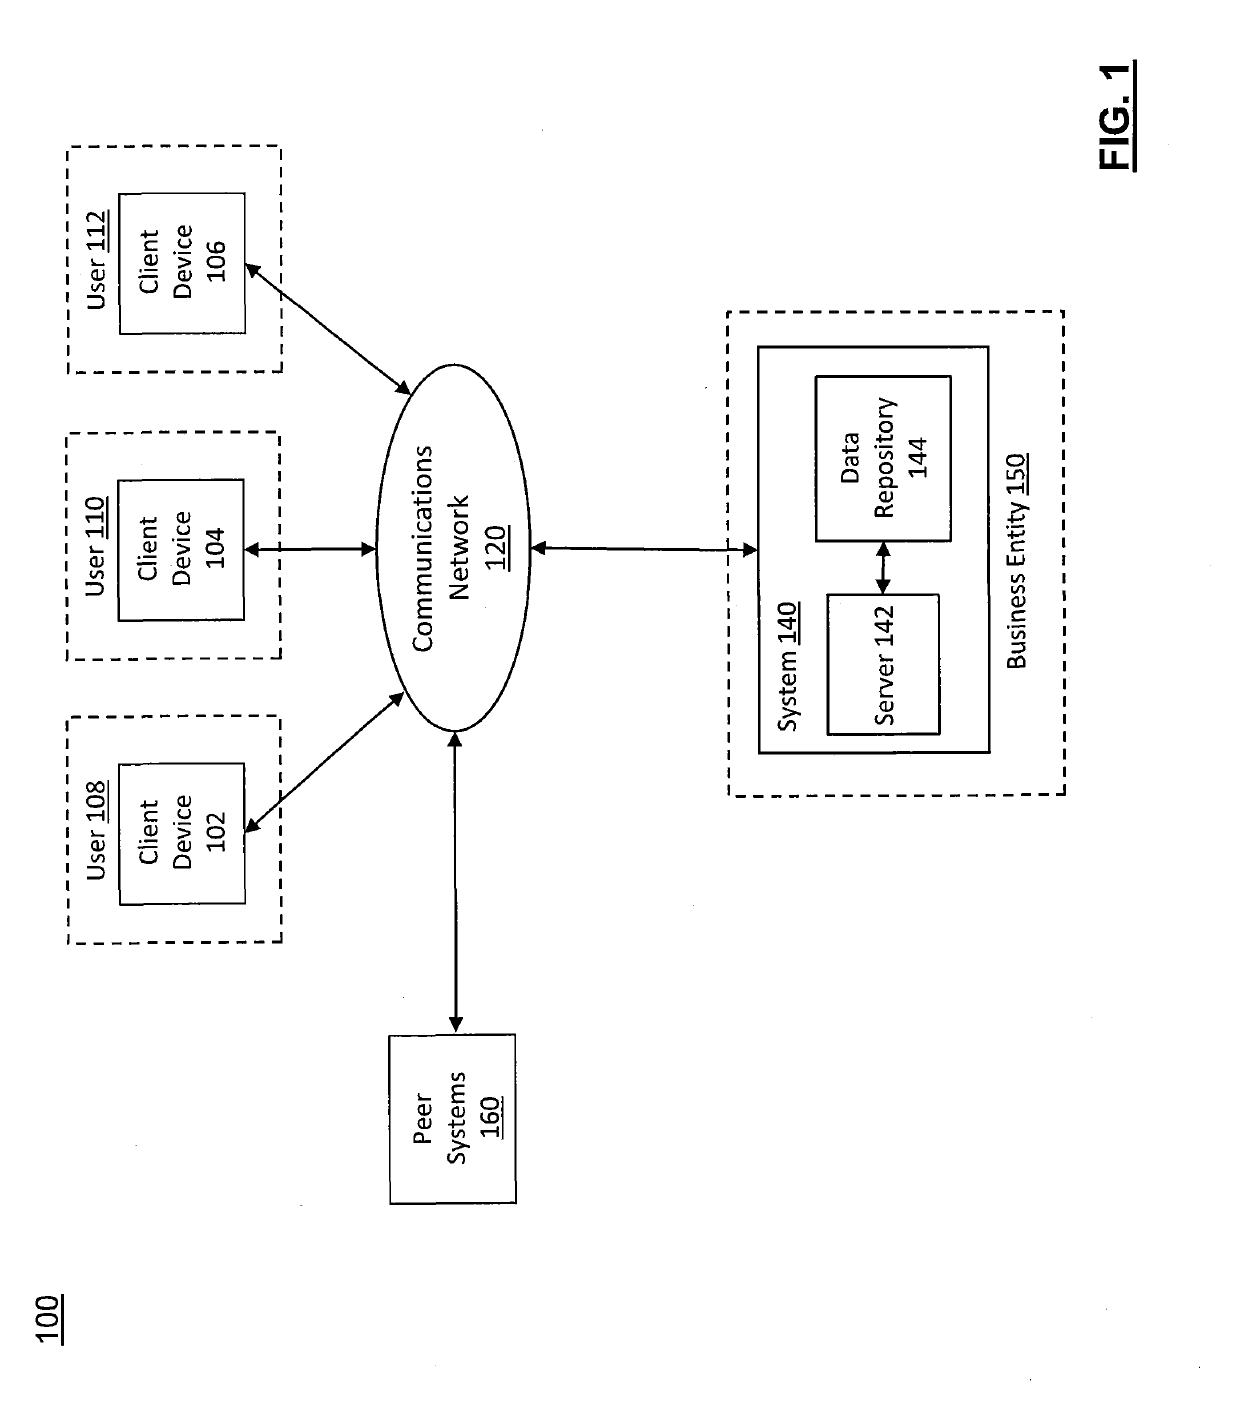 System and method for maintaining a segregated database in a multiple distributed ledger system